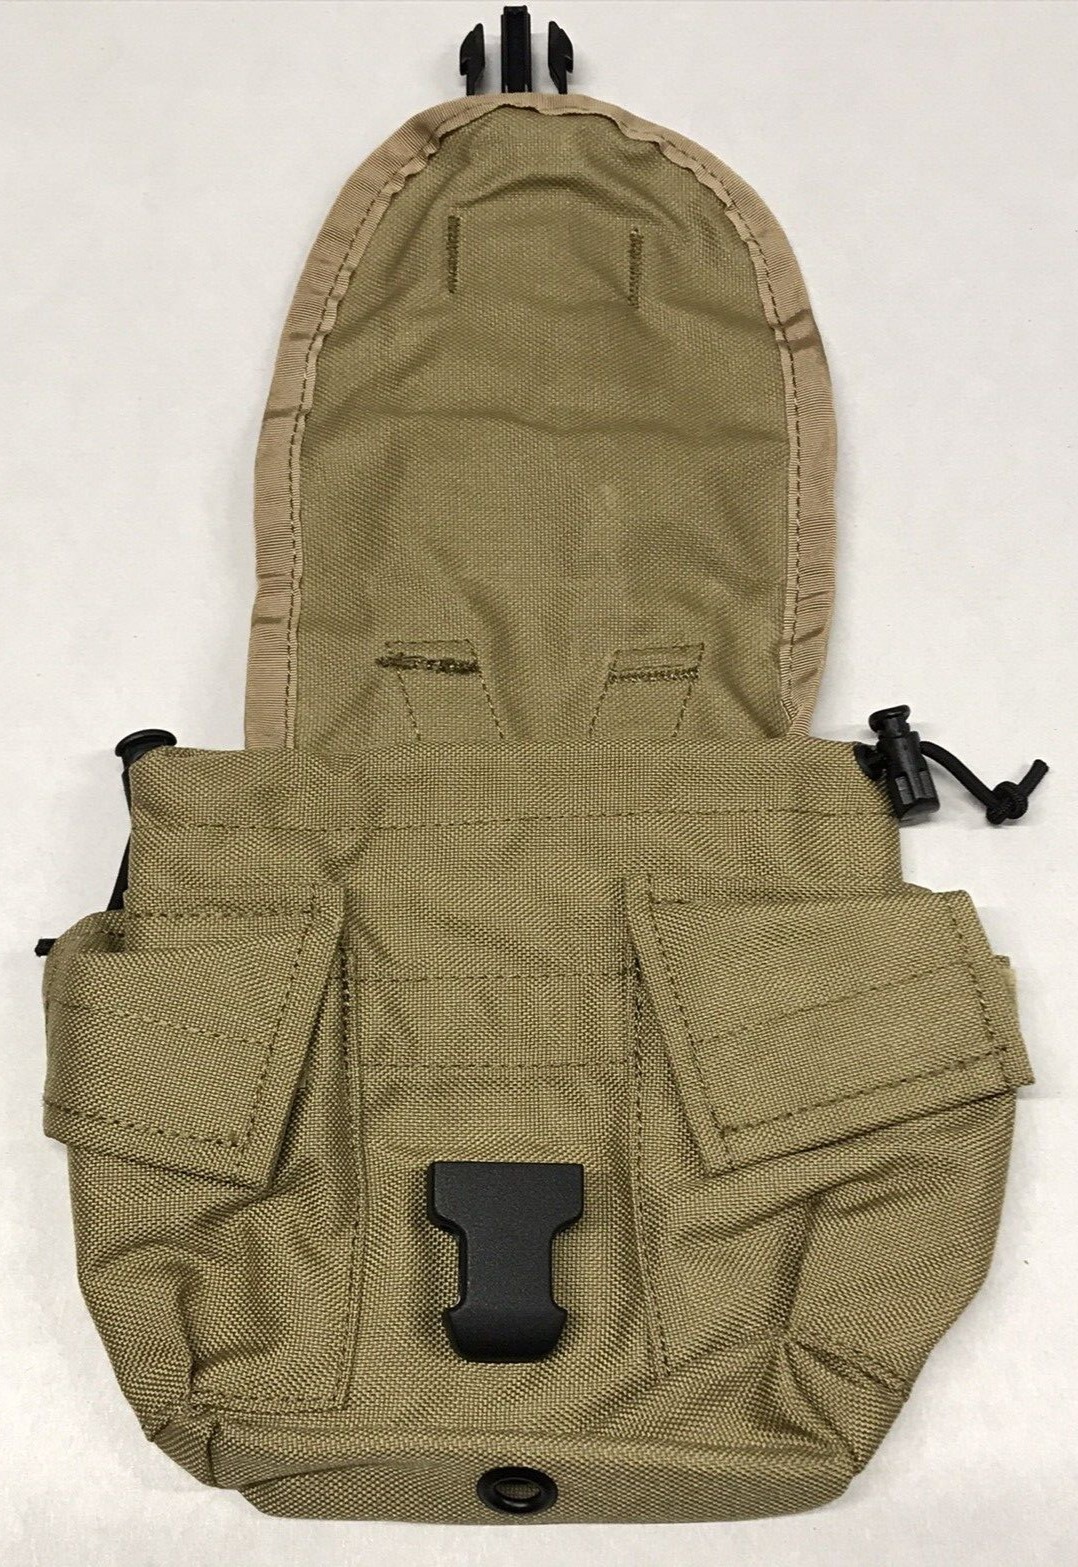 SDS (Specialty Defense Systems) Molle ll H1 Quart Canteen / Utility Pocket – Style 40151